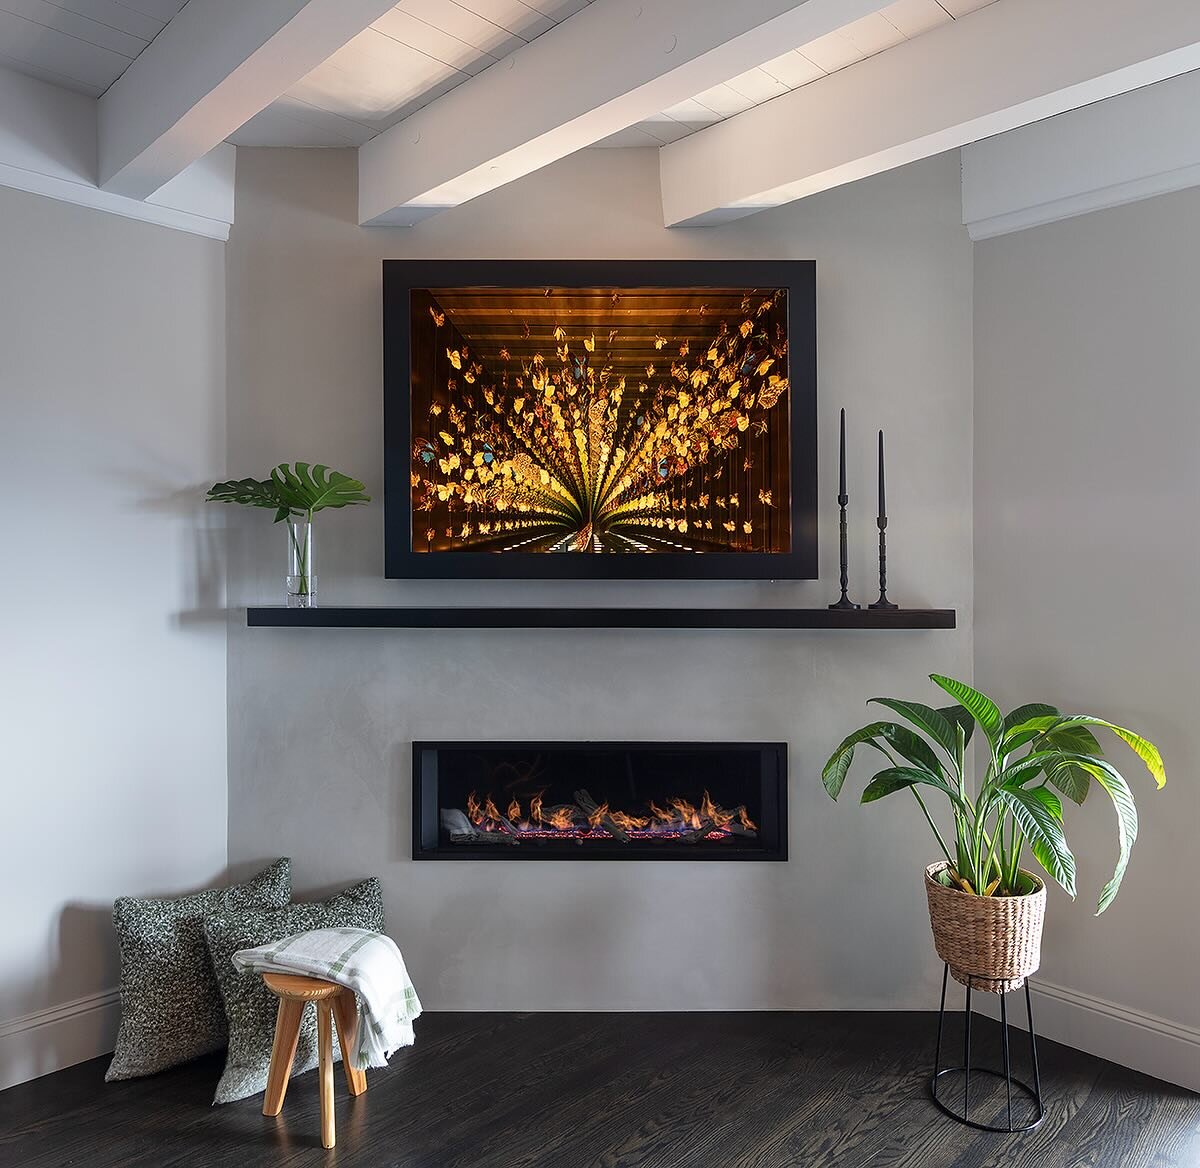 Imagine curling up by this warm, sleek and modern fireplace as you gaze at this enchanting art piece of dancing butterflies by Jocelyn March. 

Swipe left to explore the before pictures of the dated mantle and see the process of how our team transfor